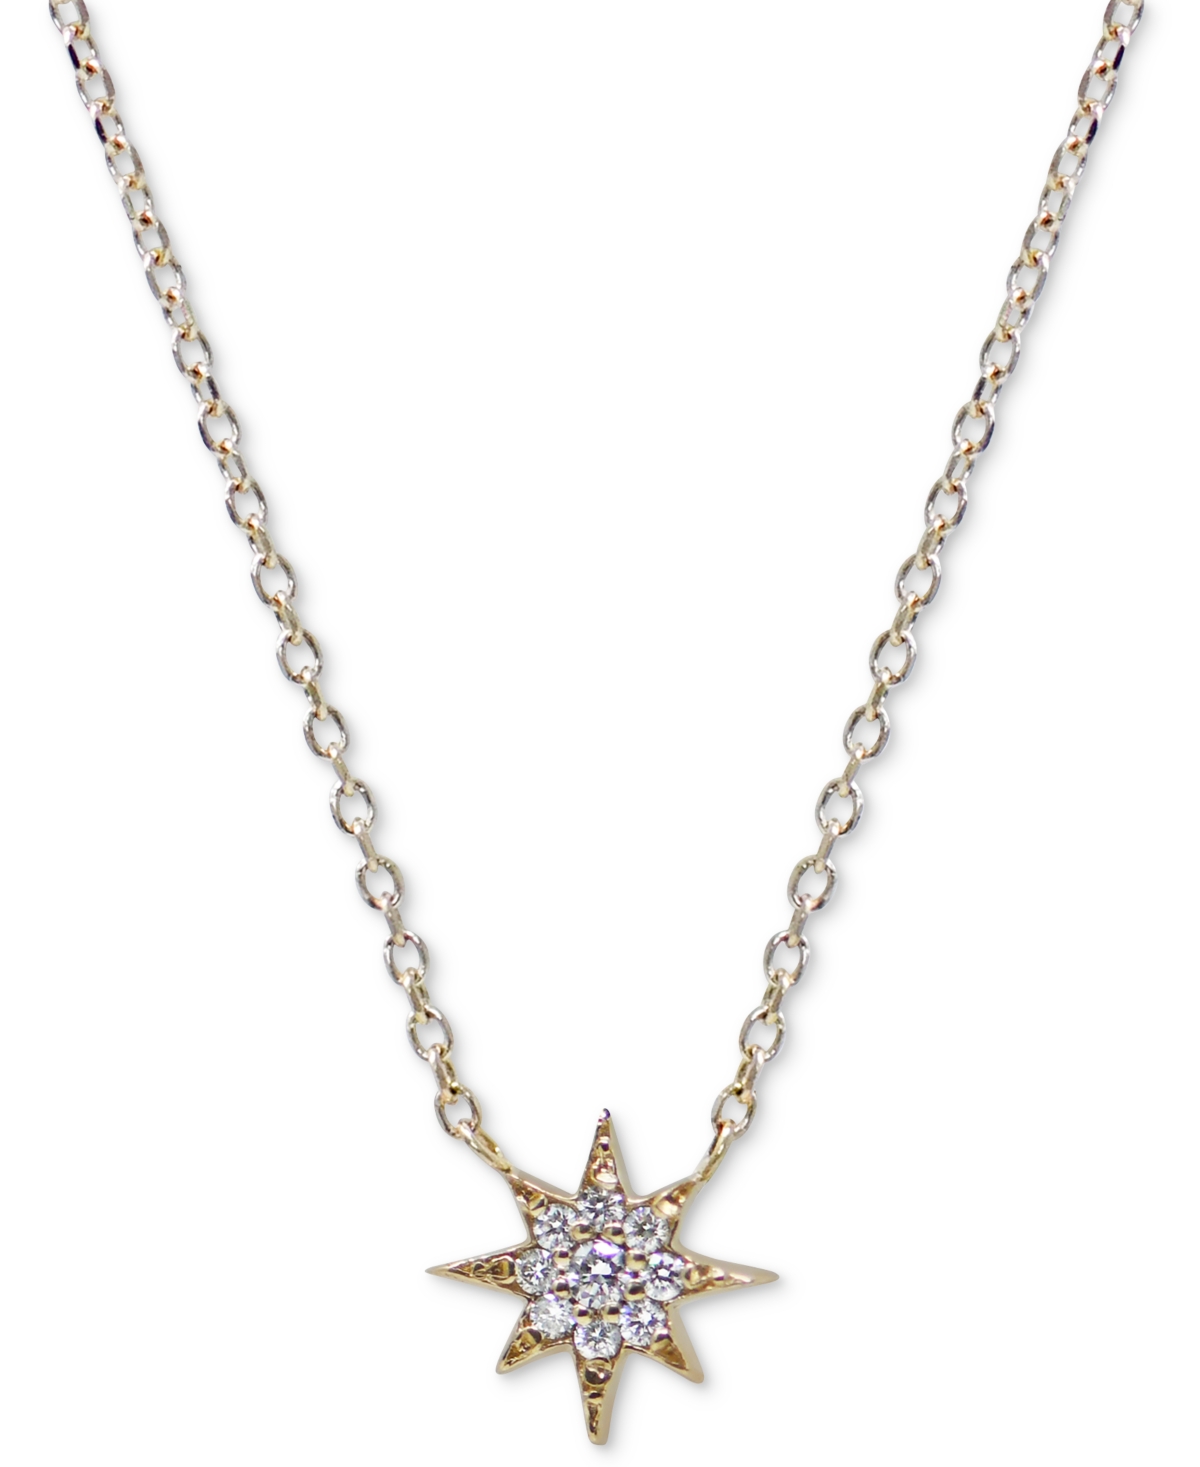 Diamond Cluster North Star Pendant Necklace (1/20 ct. t.w.) in 14k Gold, 16" + 1" extender - Gold